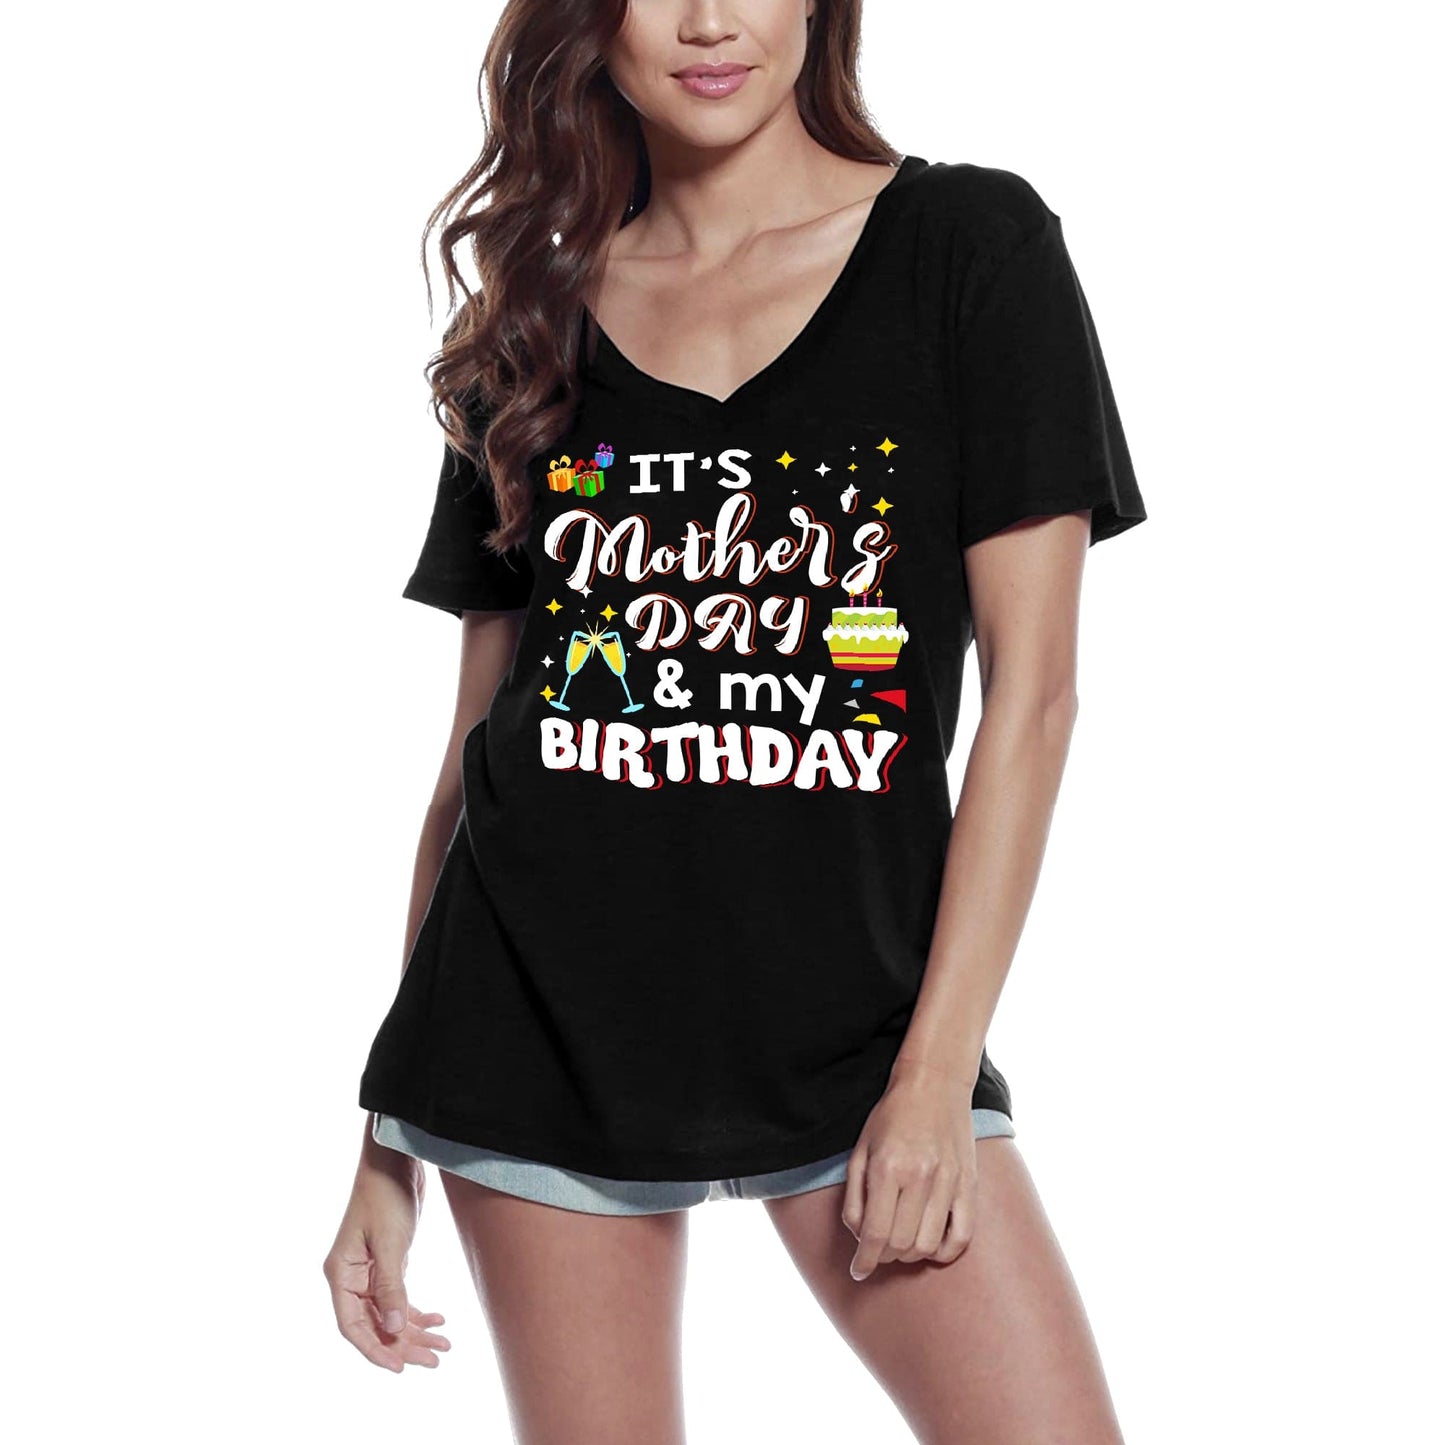 ULTRABASIC Women's T-Shirt It's Mother's Day and My Birthday - Short Sleeve Tee Shirt Tops